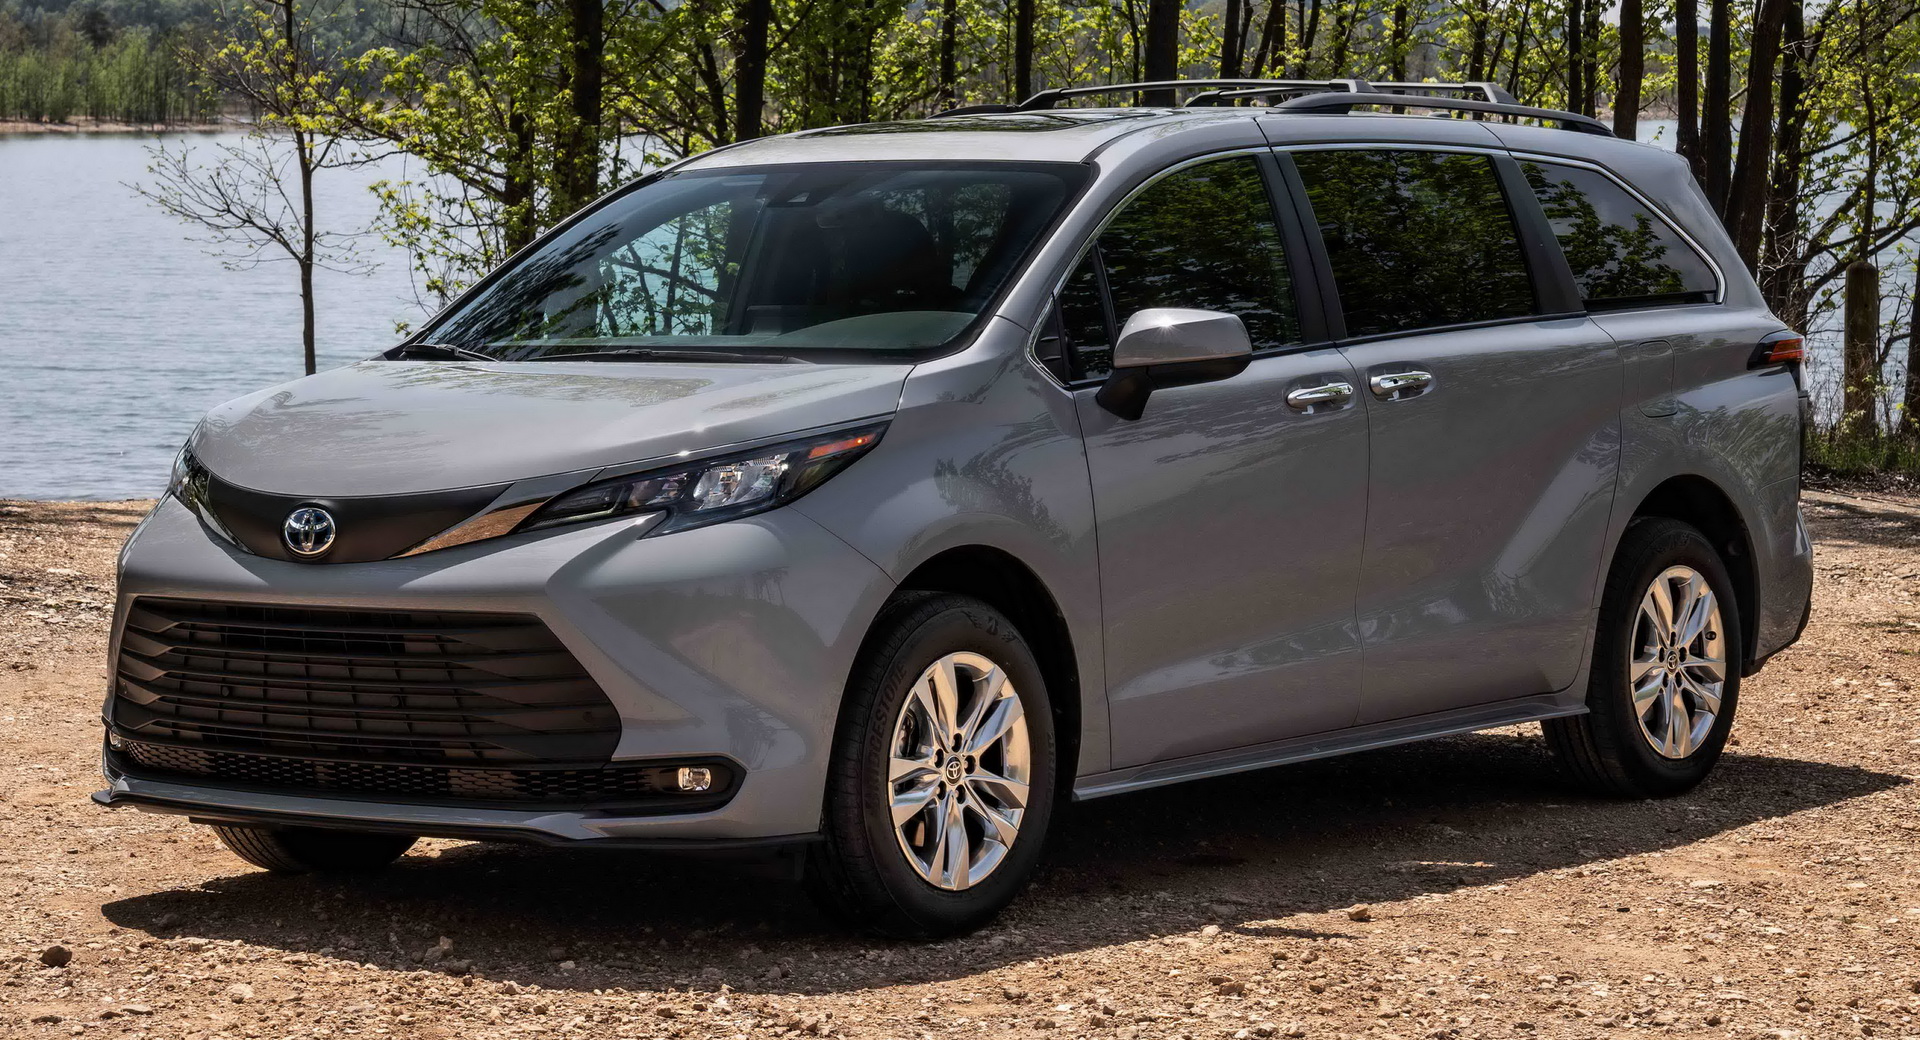 2022 Toyota Sienna Woodland Edition Is A Lifted Minivan Targeting SUV